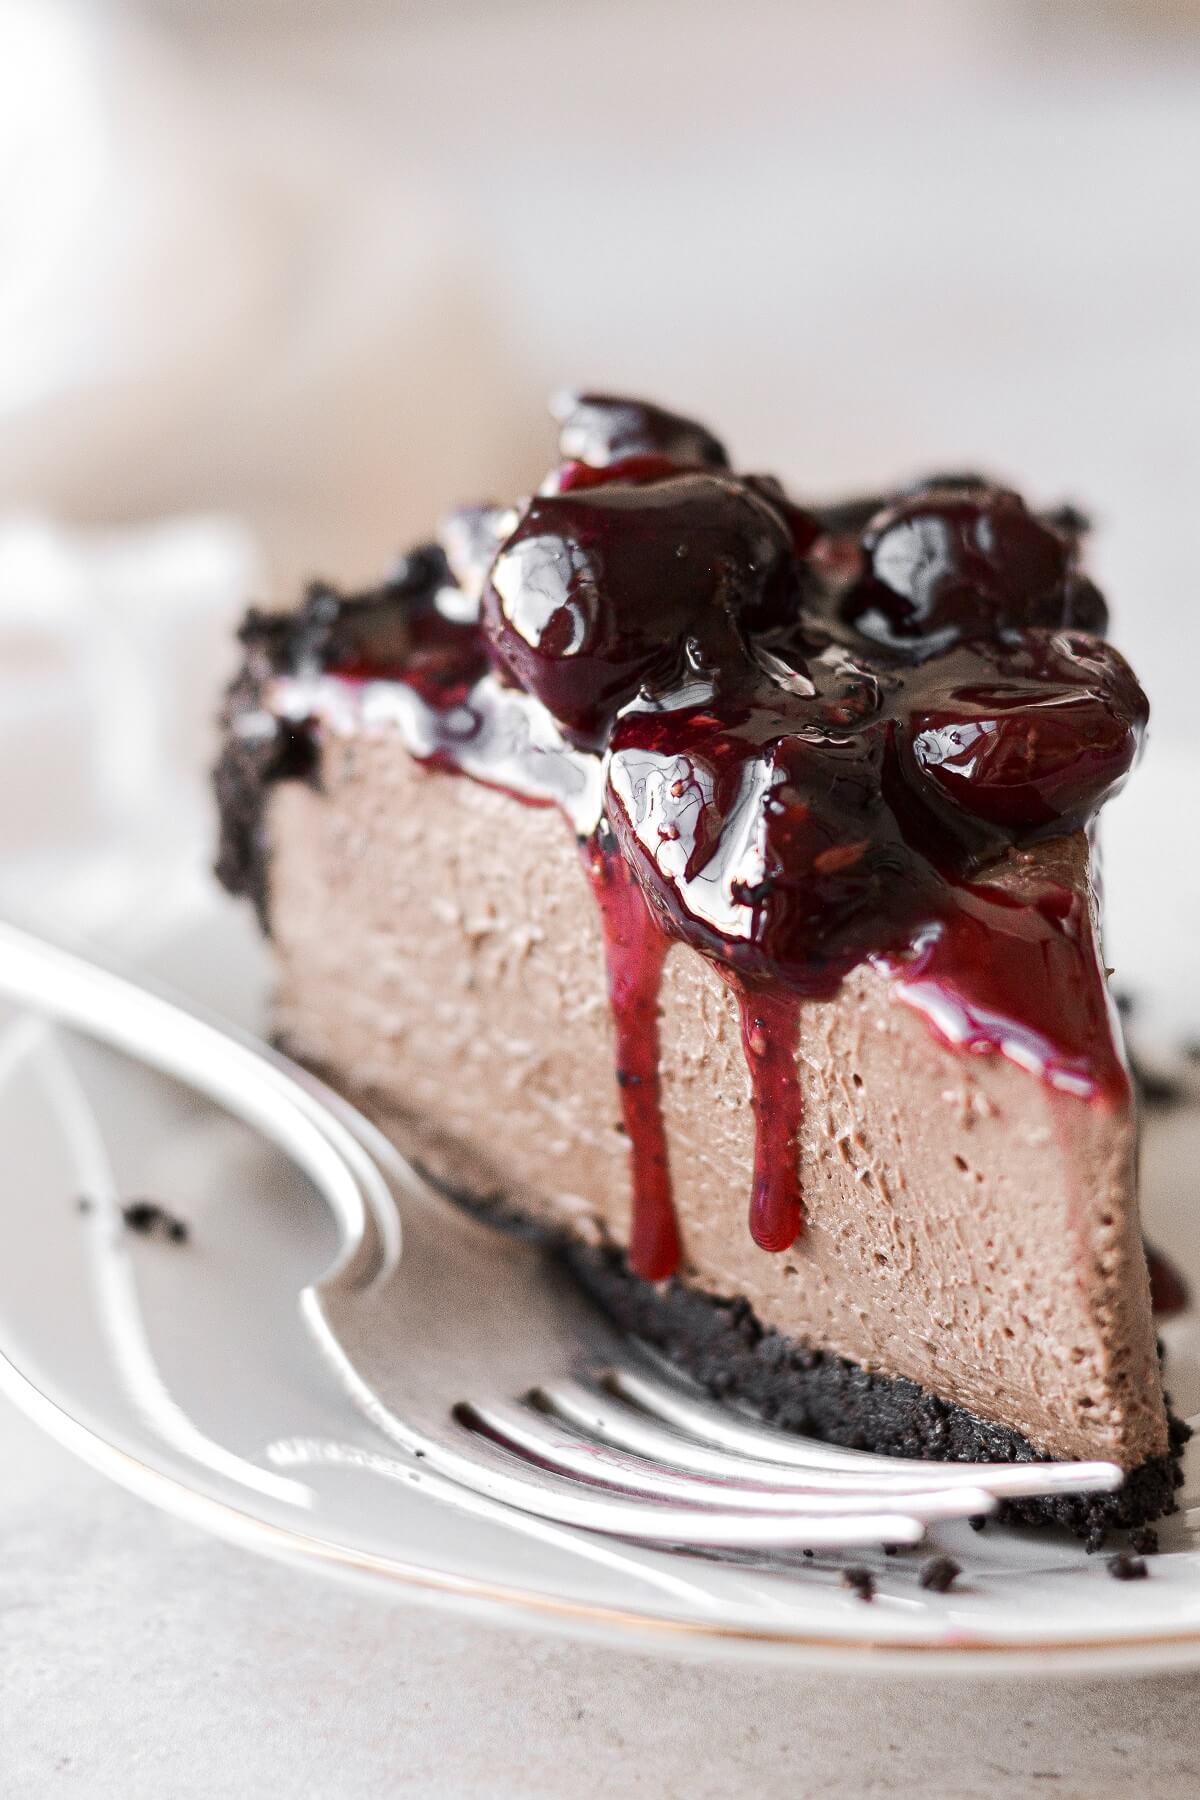 A slice of chocolate cheesecake topped with cherry sauce.